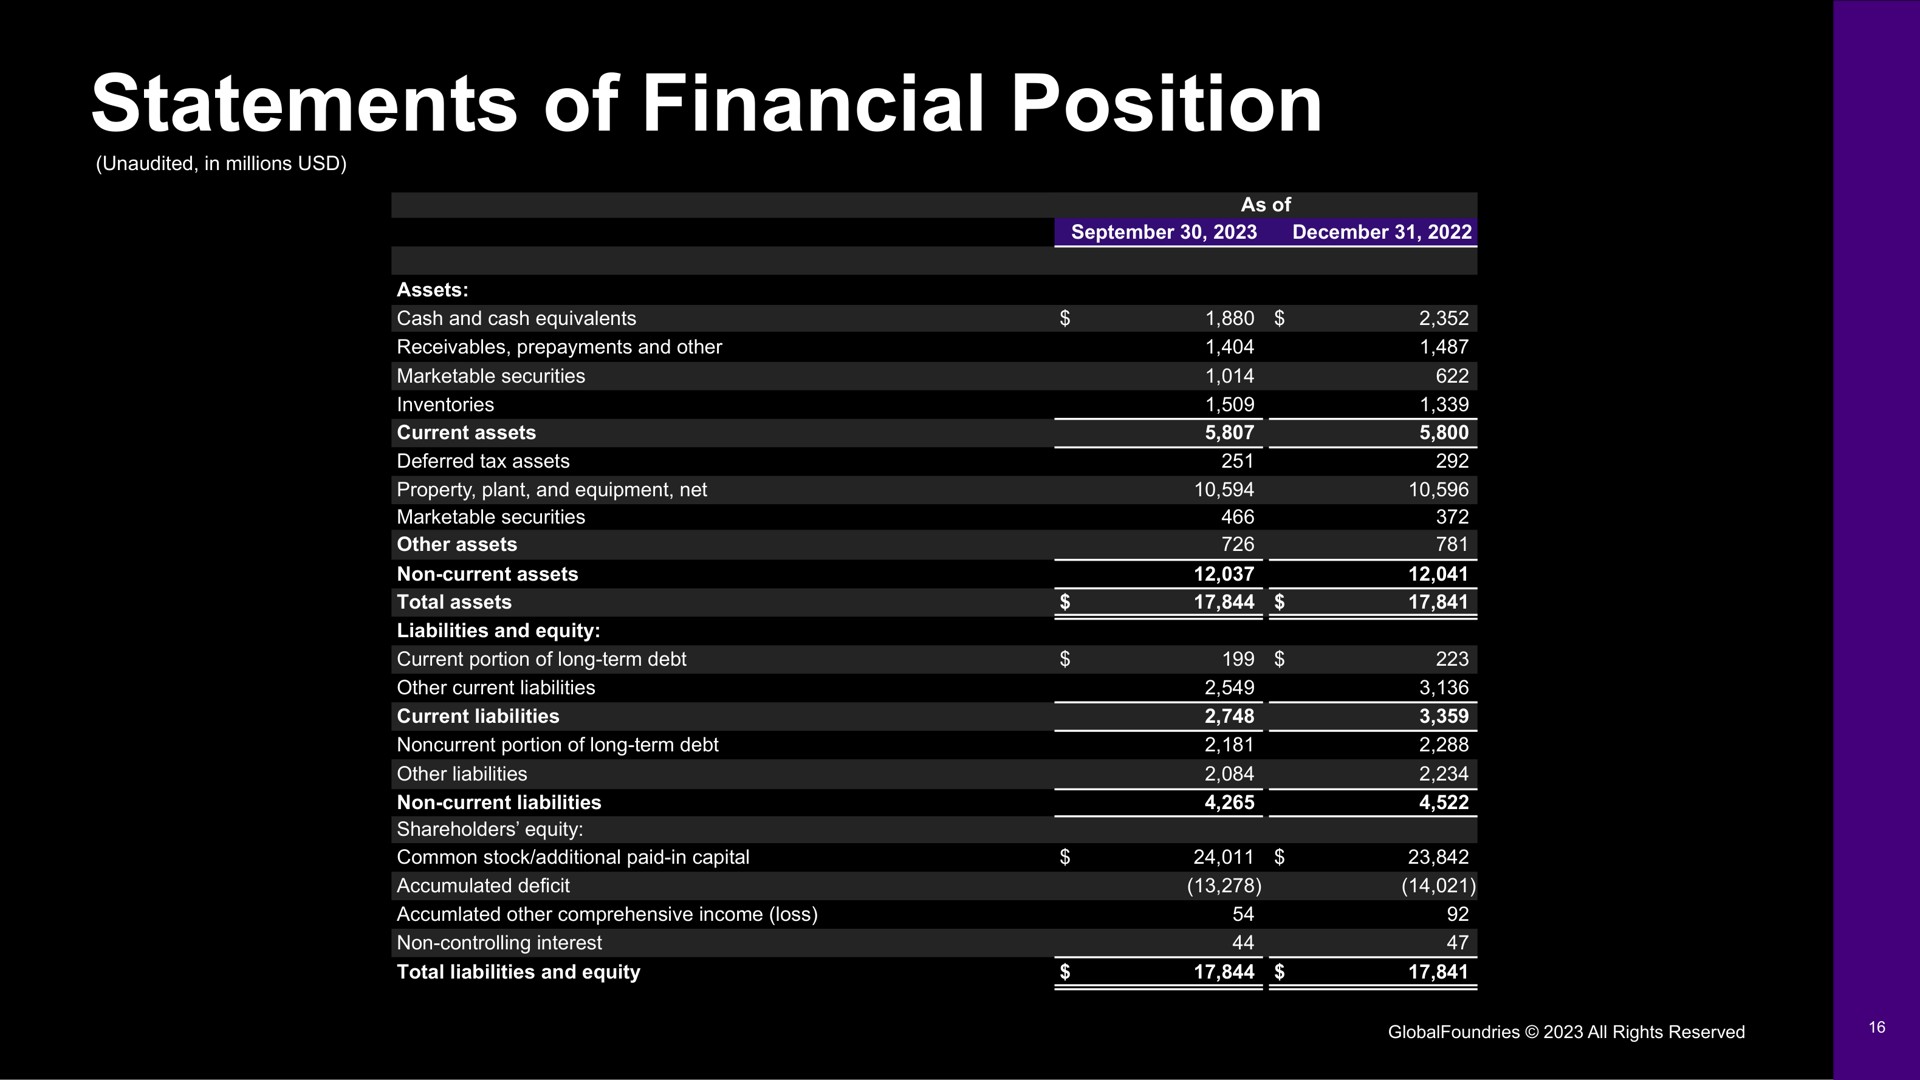 statements of financial position | GlobalFoundries